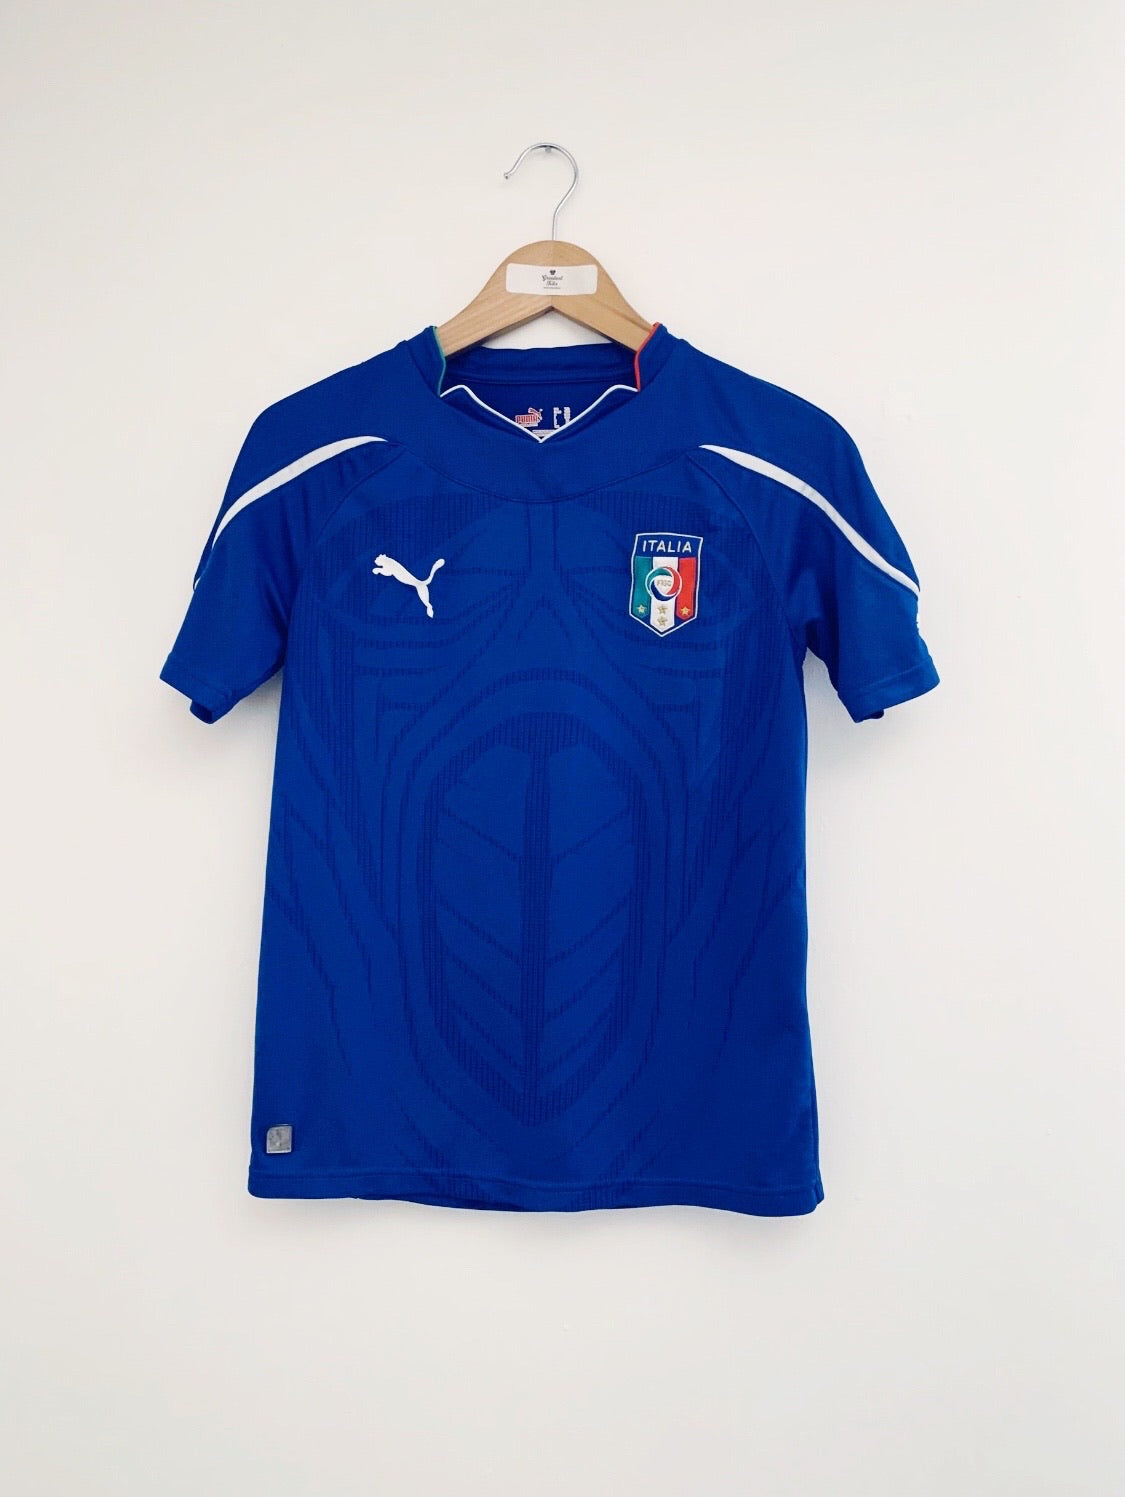 2010/12 Italy Home Shirt (XS) 9/10